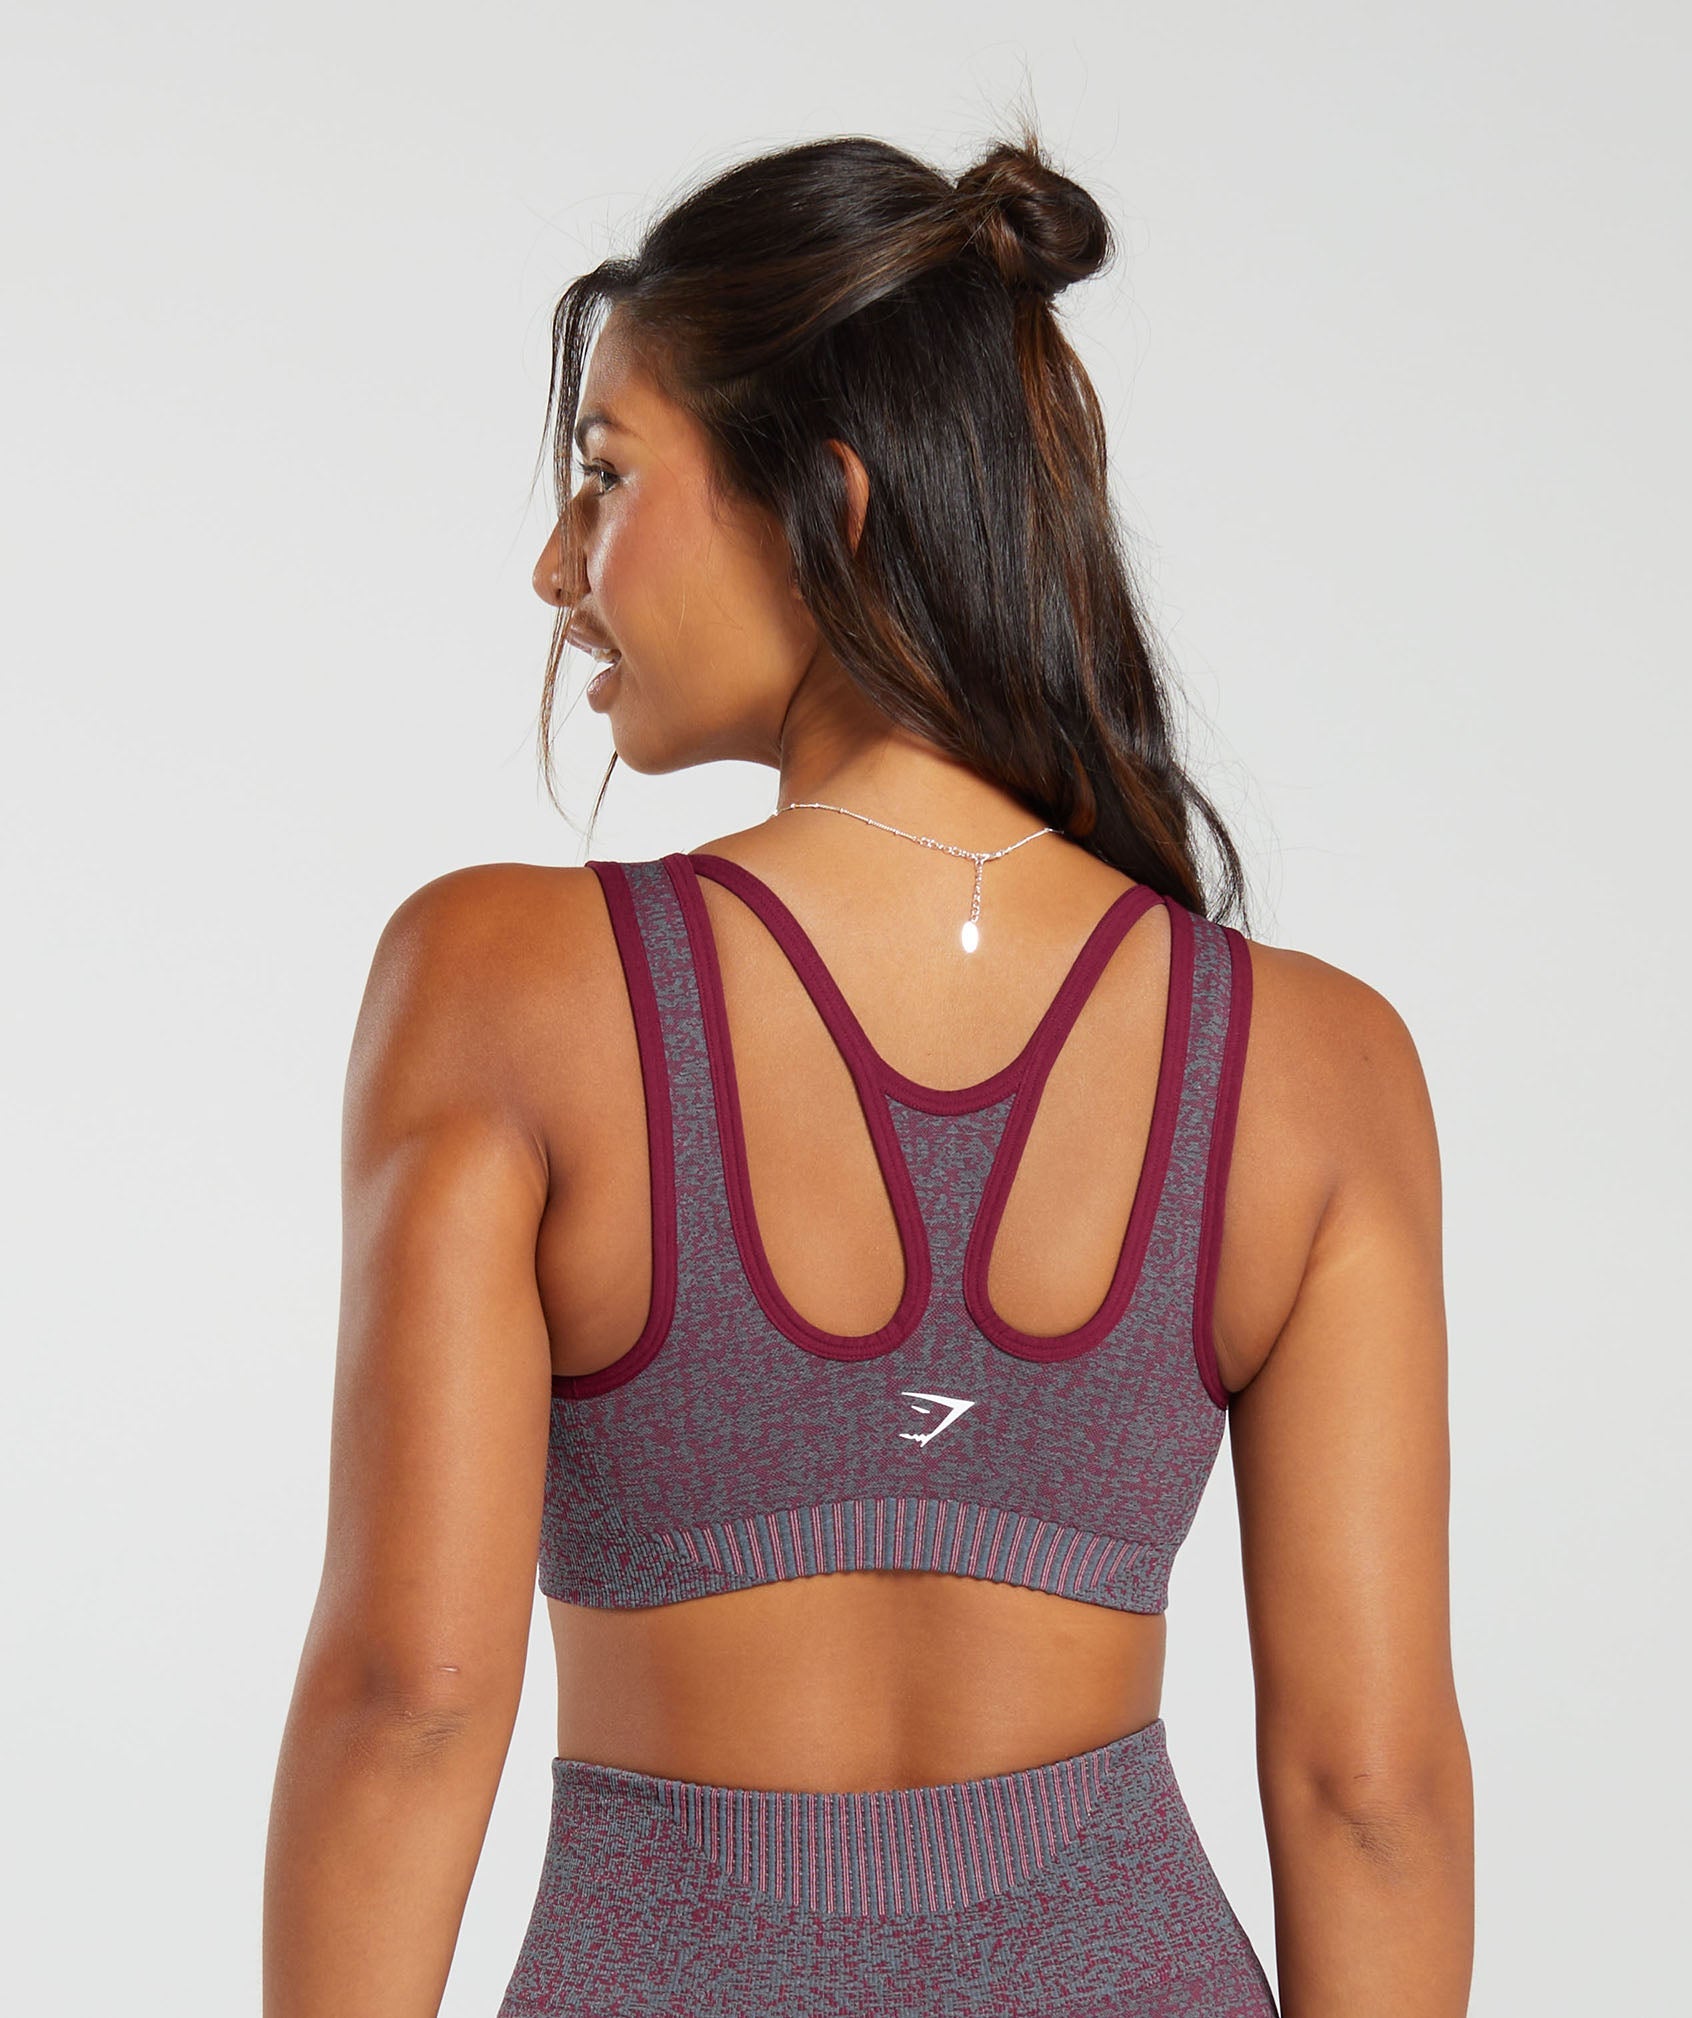 ONLY PLAY Dark Grey Seamless Ruched Sports Bra